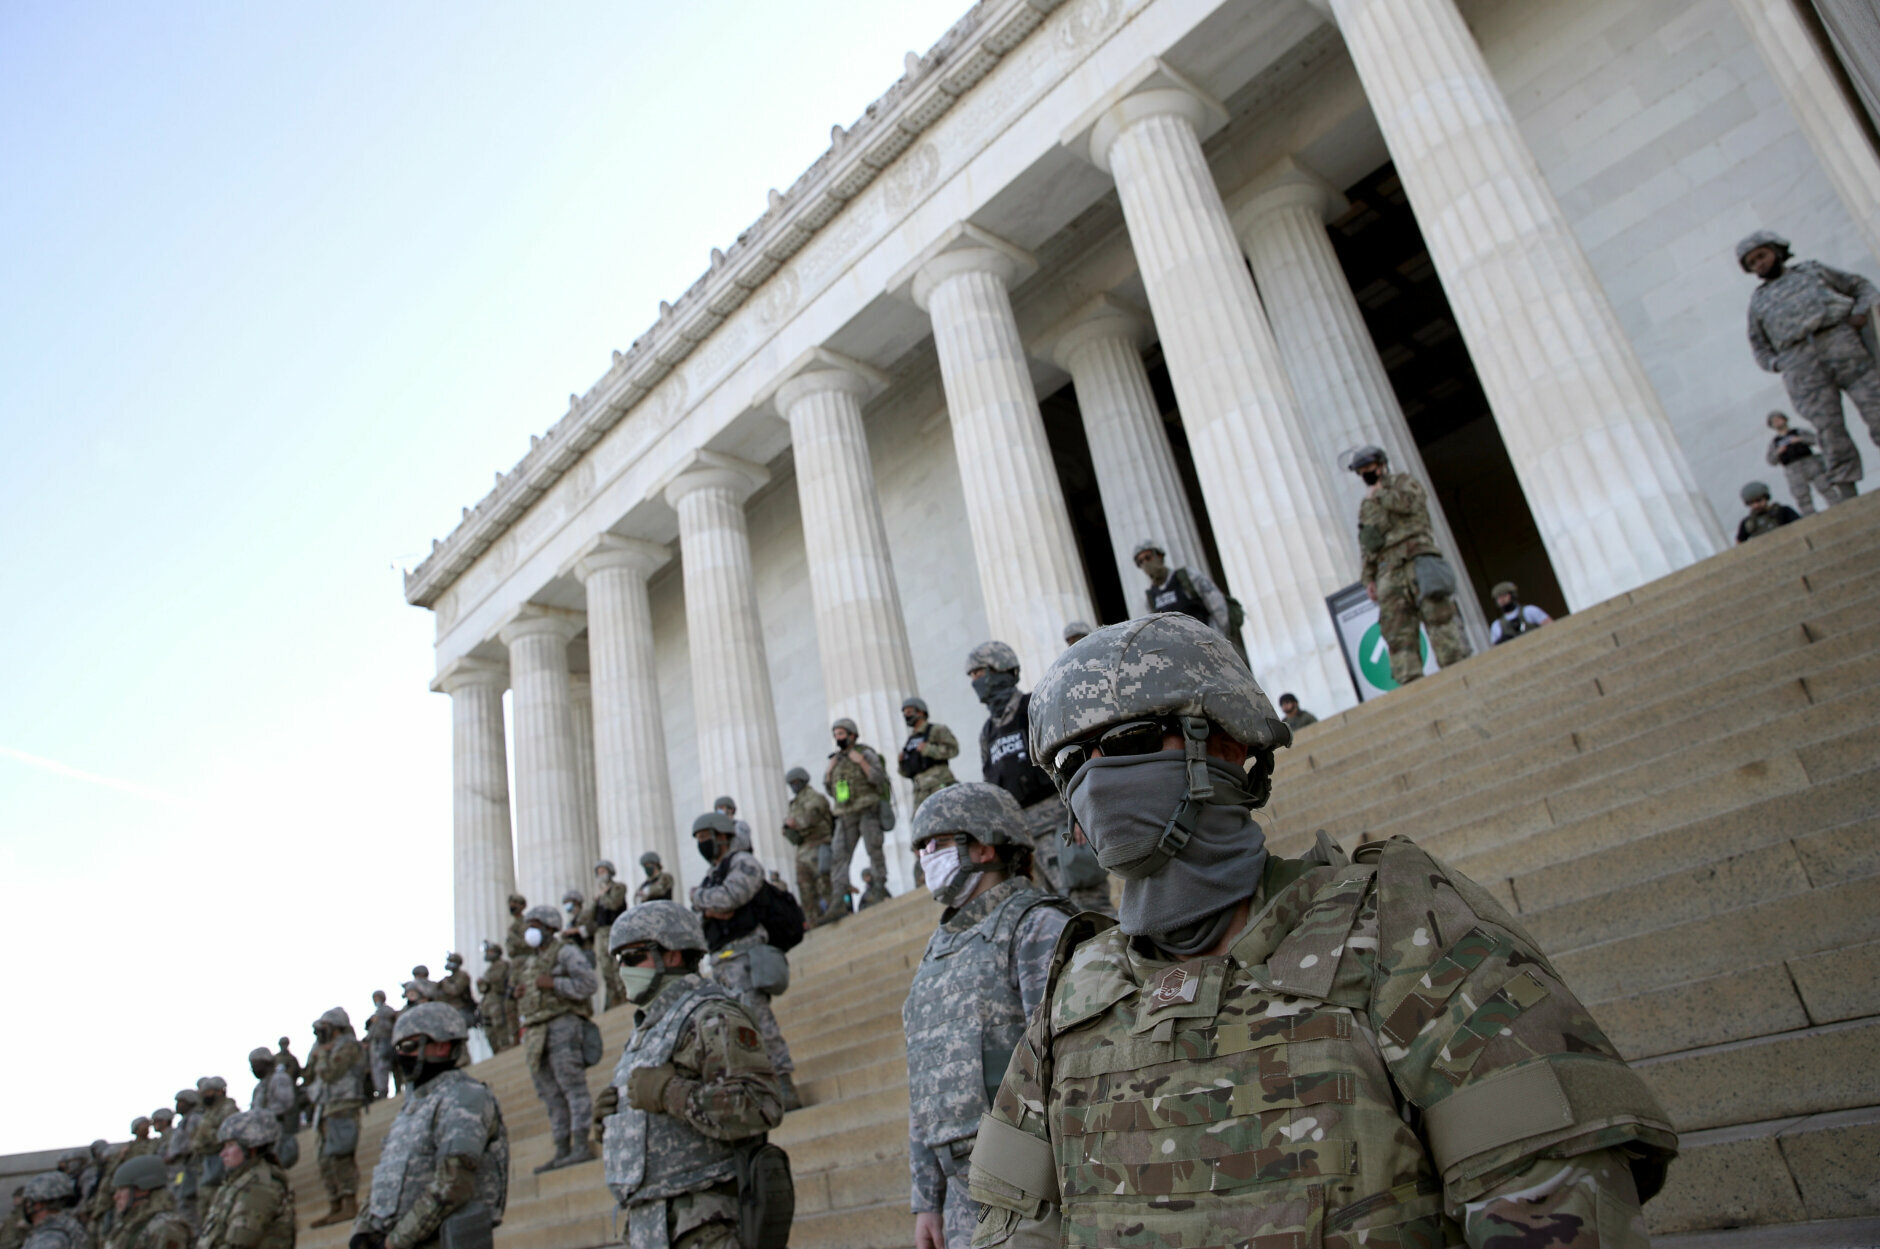 Masked members of the National Guard on the steps of the Lincoln Memorial.